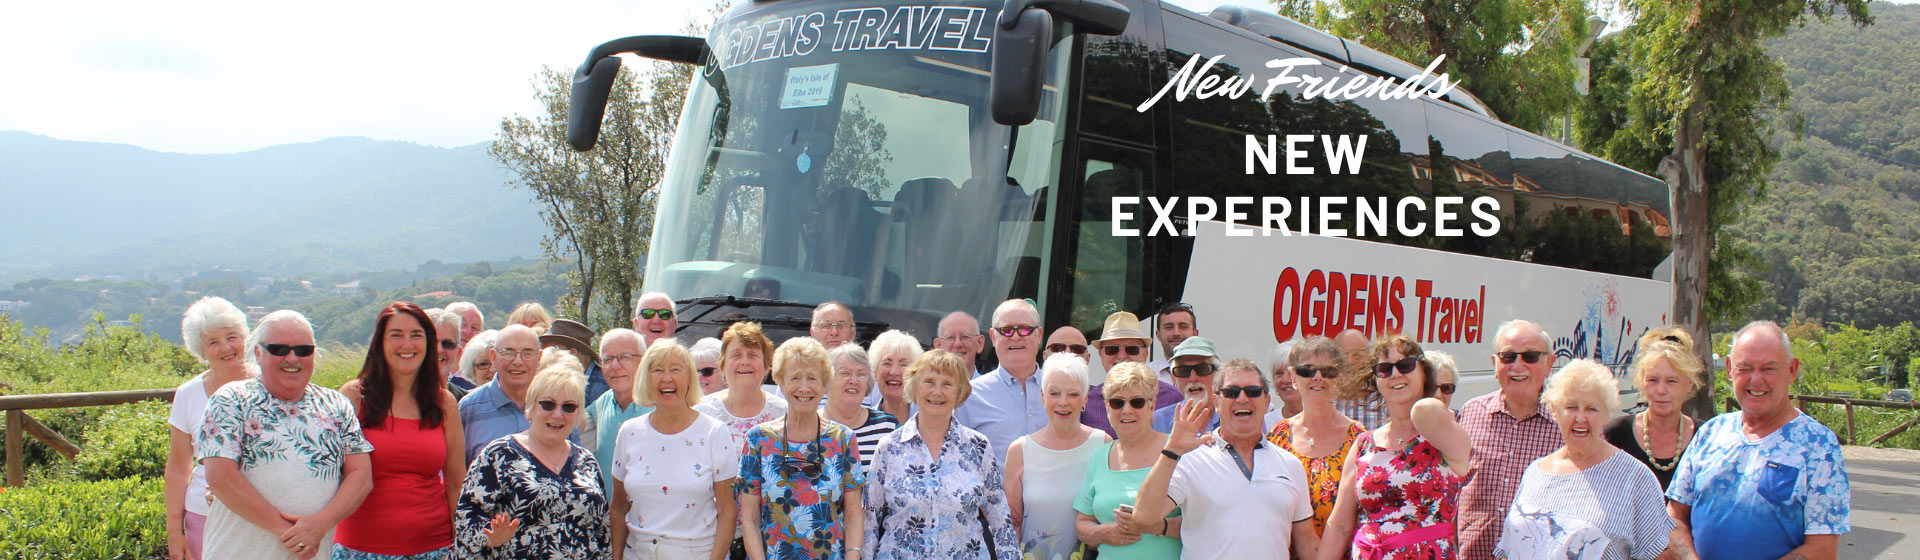 coach trips from belfast to uk